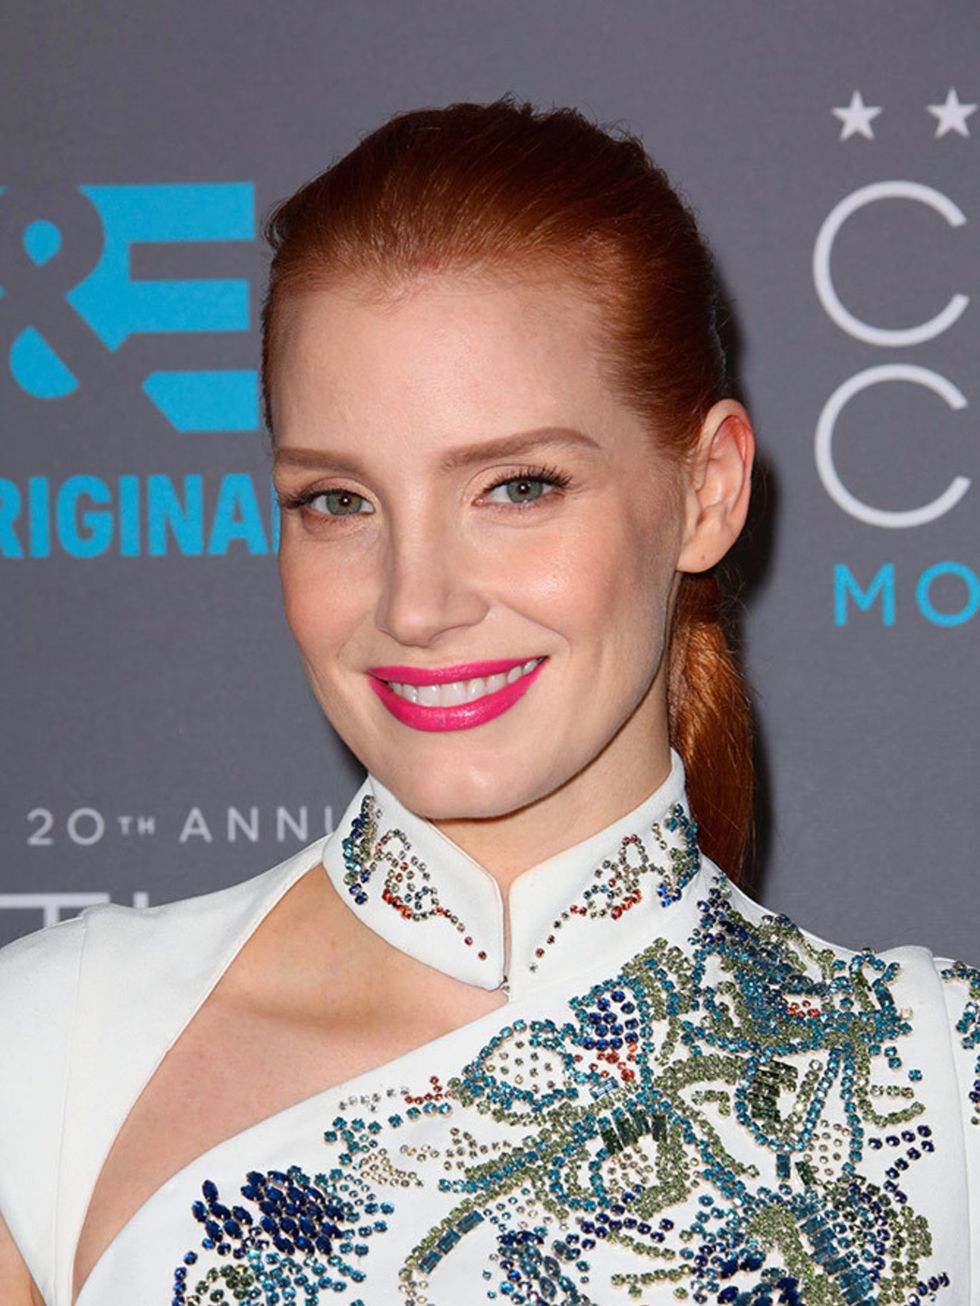 <p><a href="http://www.elleuk.com/fashion/celebrity-style/jessica-chastain">Jessica Chastain</a></p>